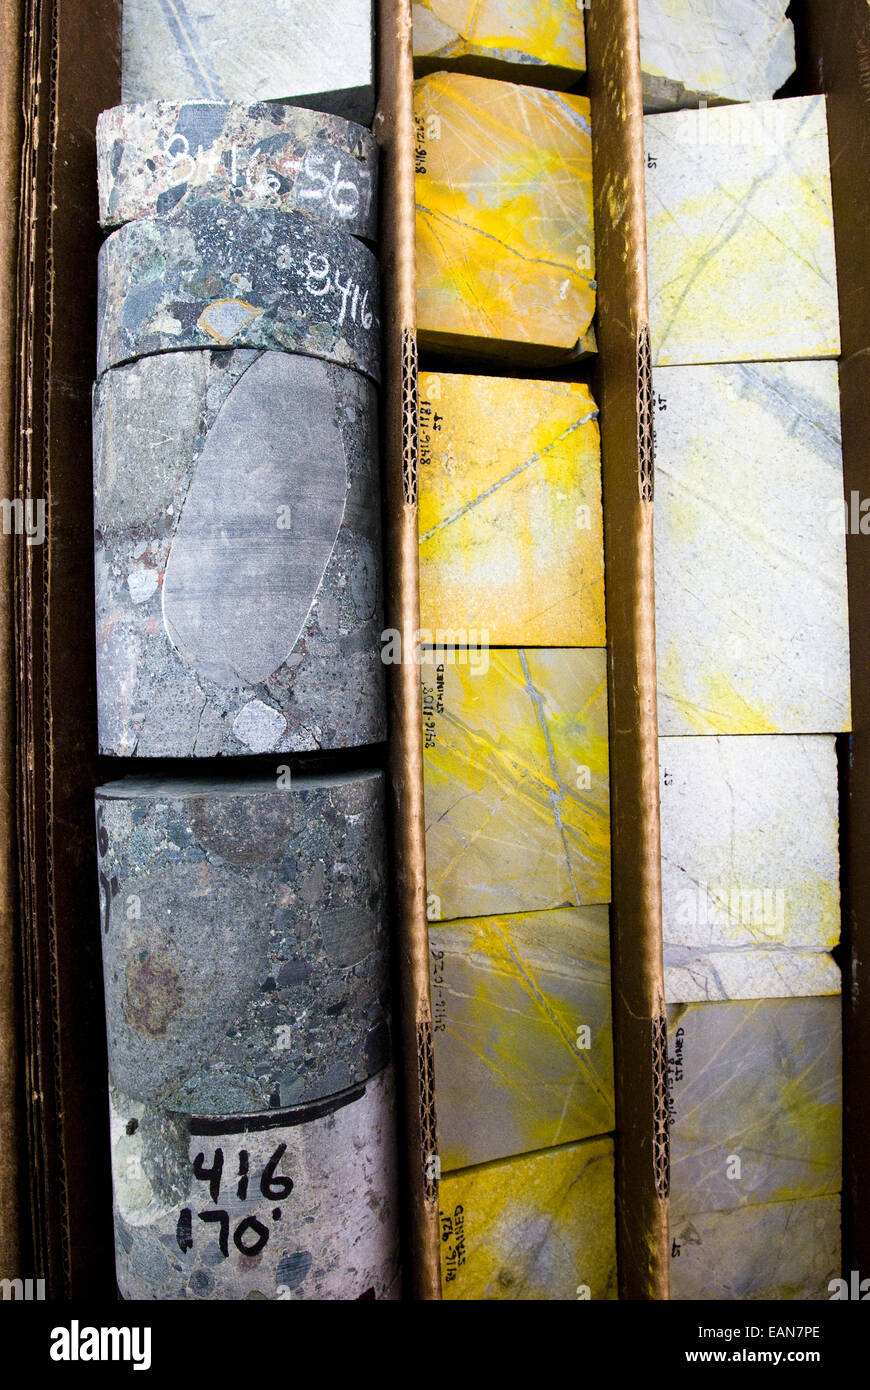 Core Samples From The Proposed Pebble Mine Site Sit In Bins At A Northern Dynasty-Pebble Mine Lab Near Iliamna, Alaska Stock Photo